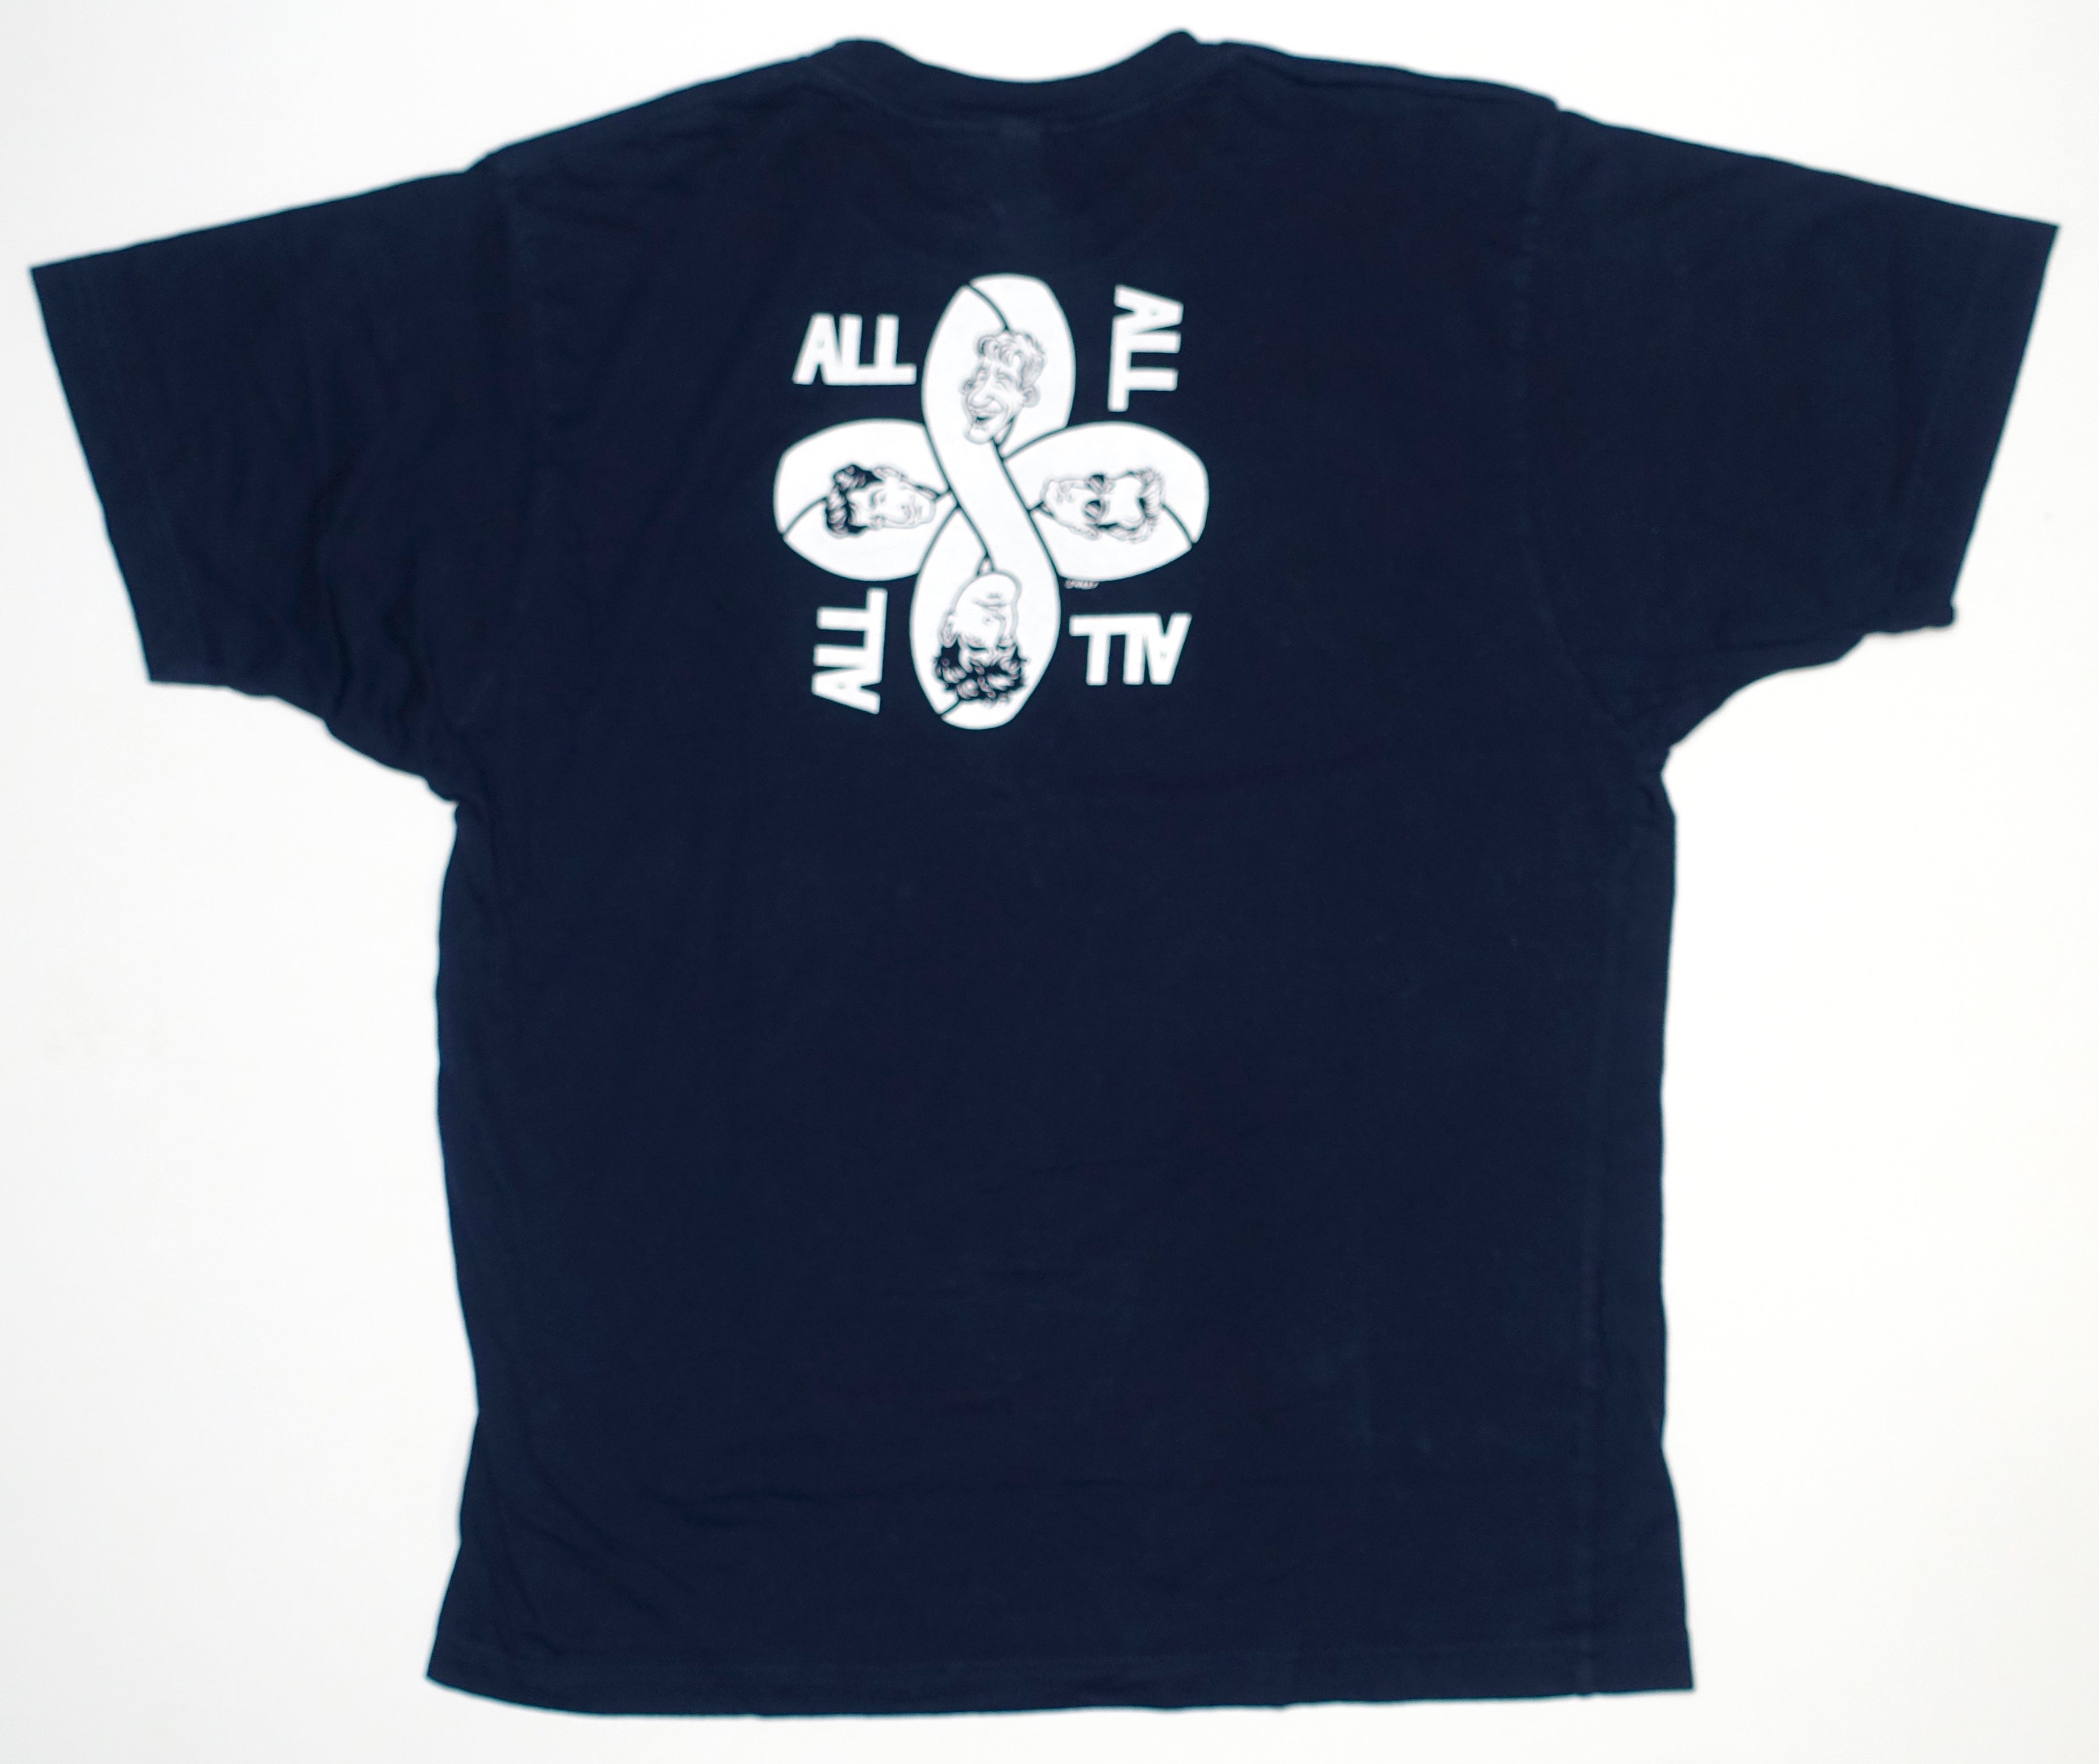 ALL - Southern CA 2009 Tour Shirt Size Large